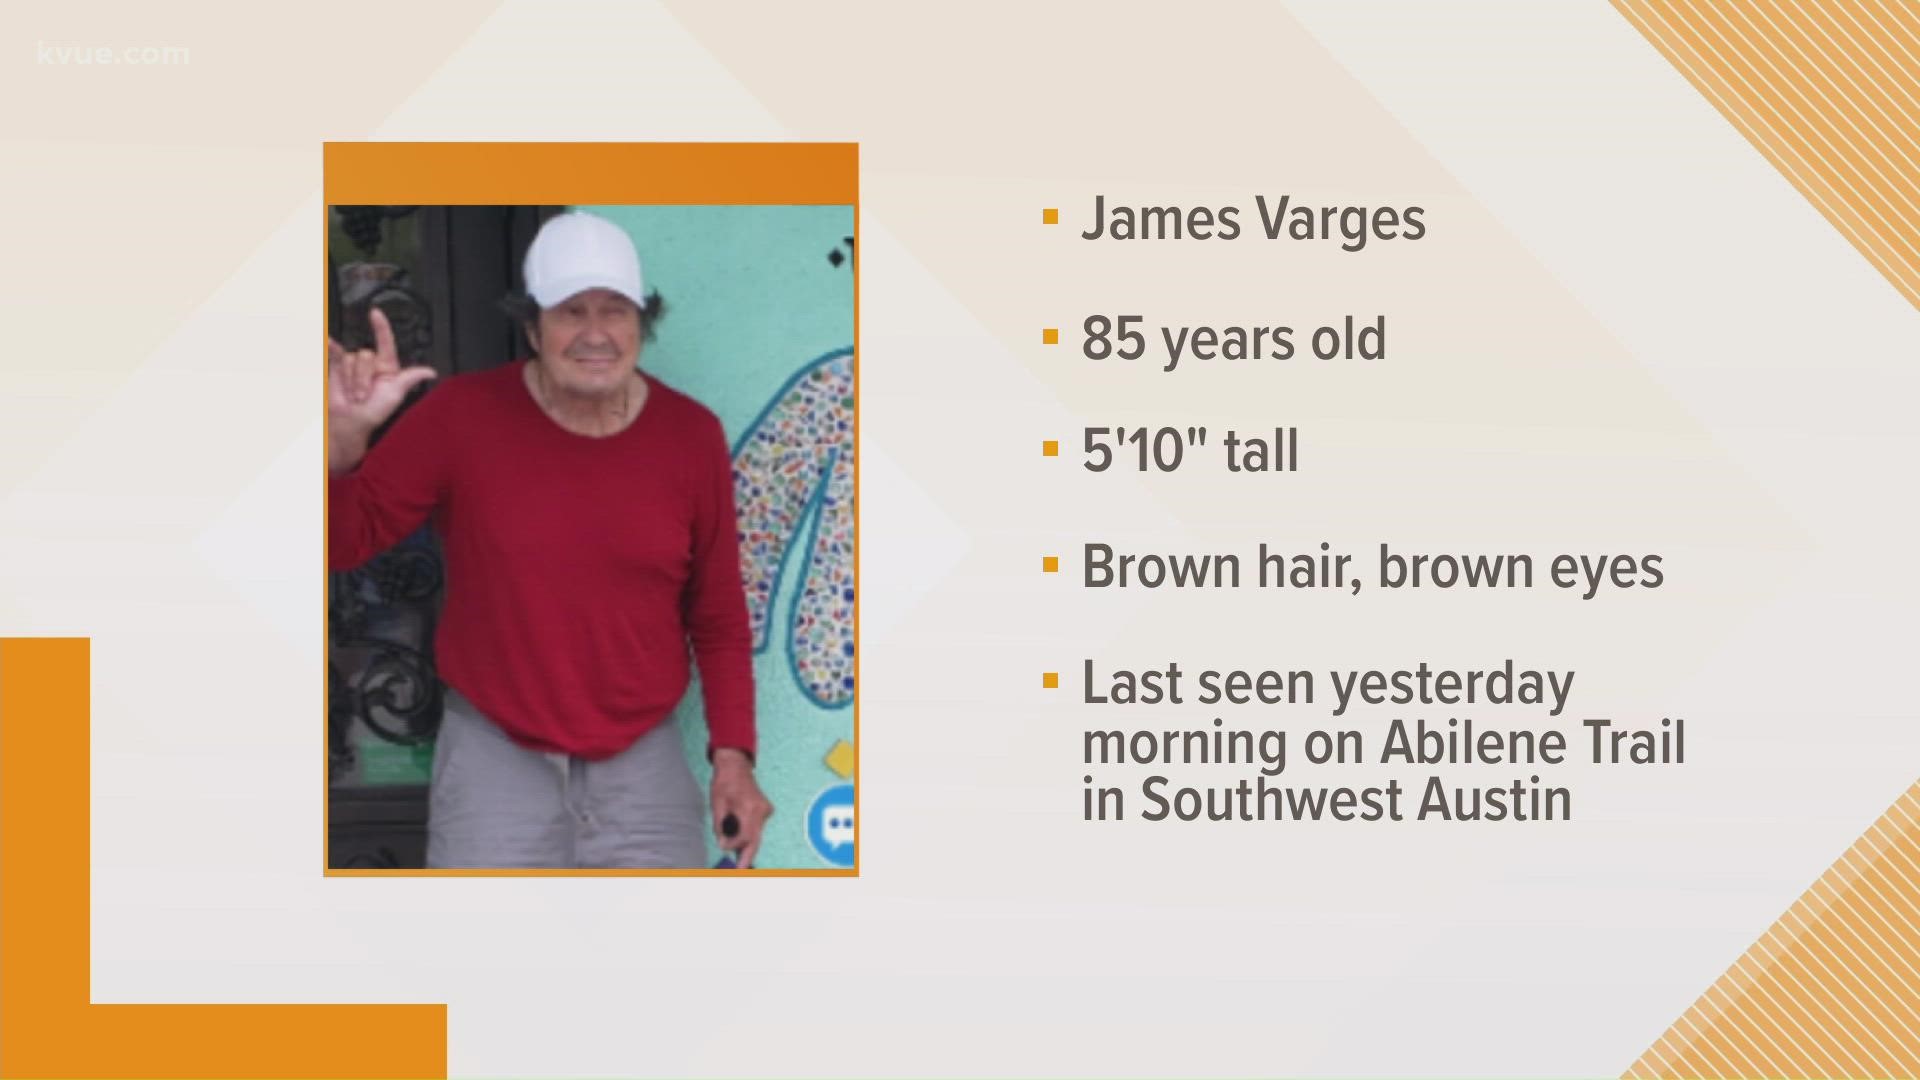 Austin police are asking for help finding a missing man.